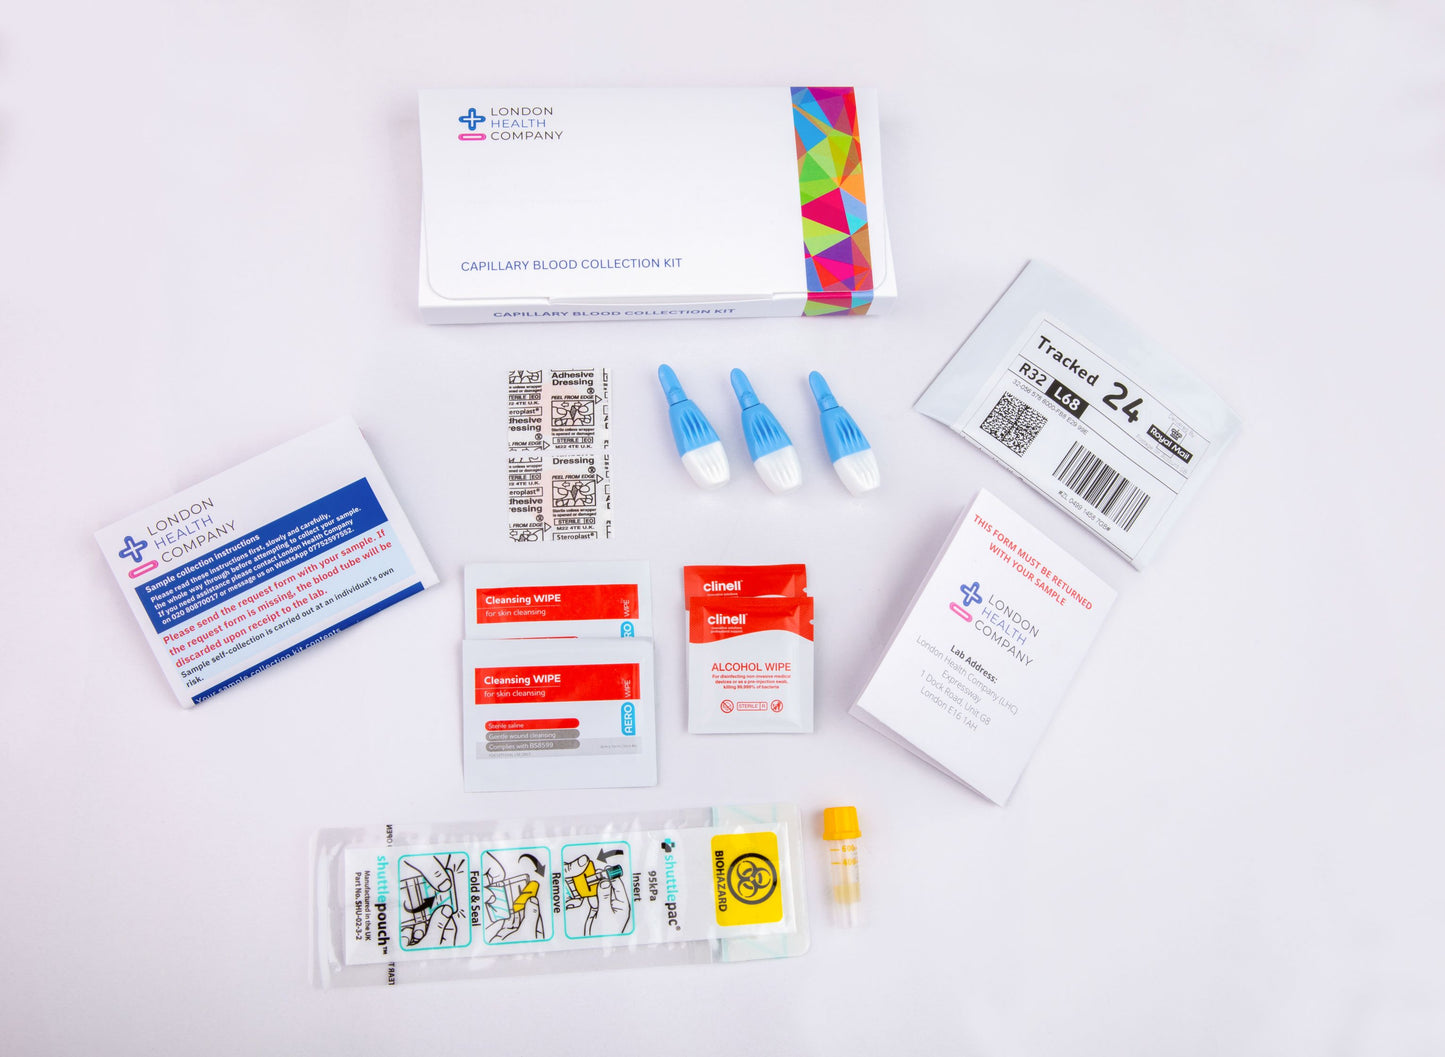 Blood Collection kit for cholesterol testing